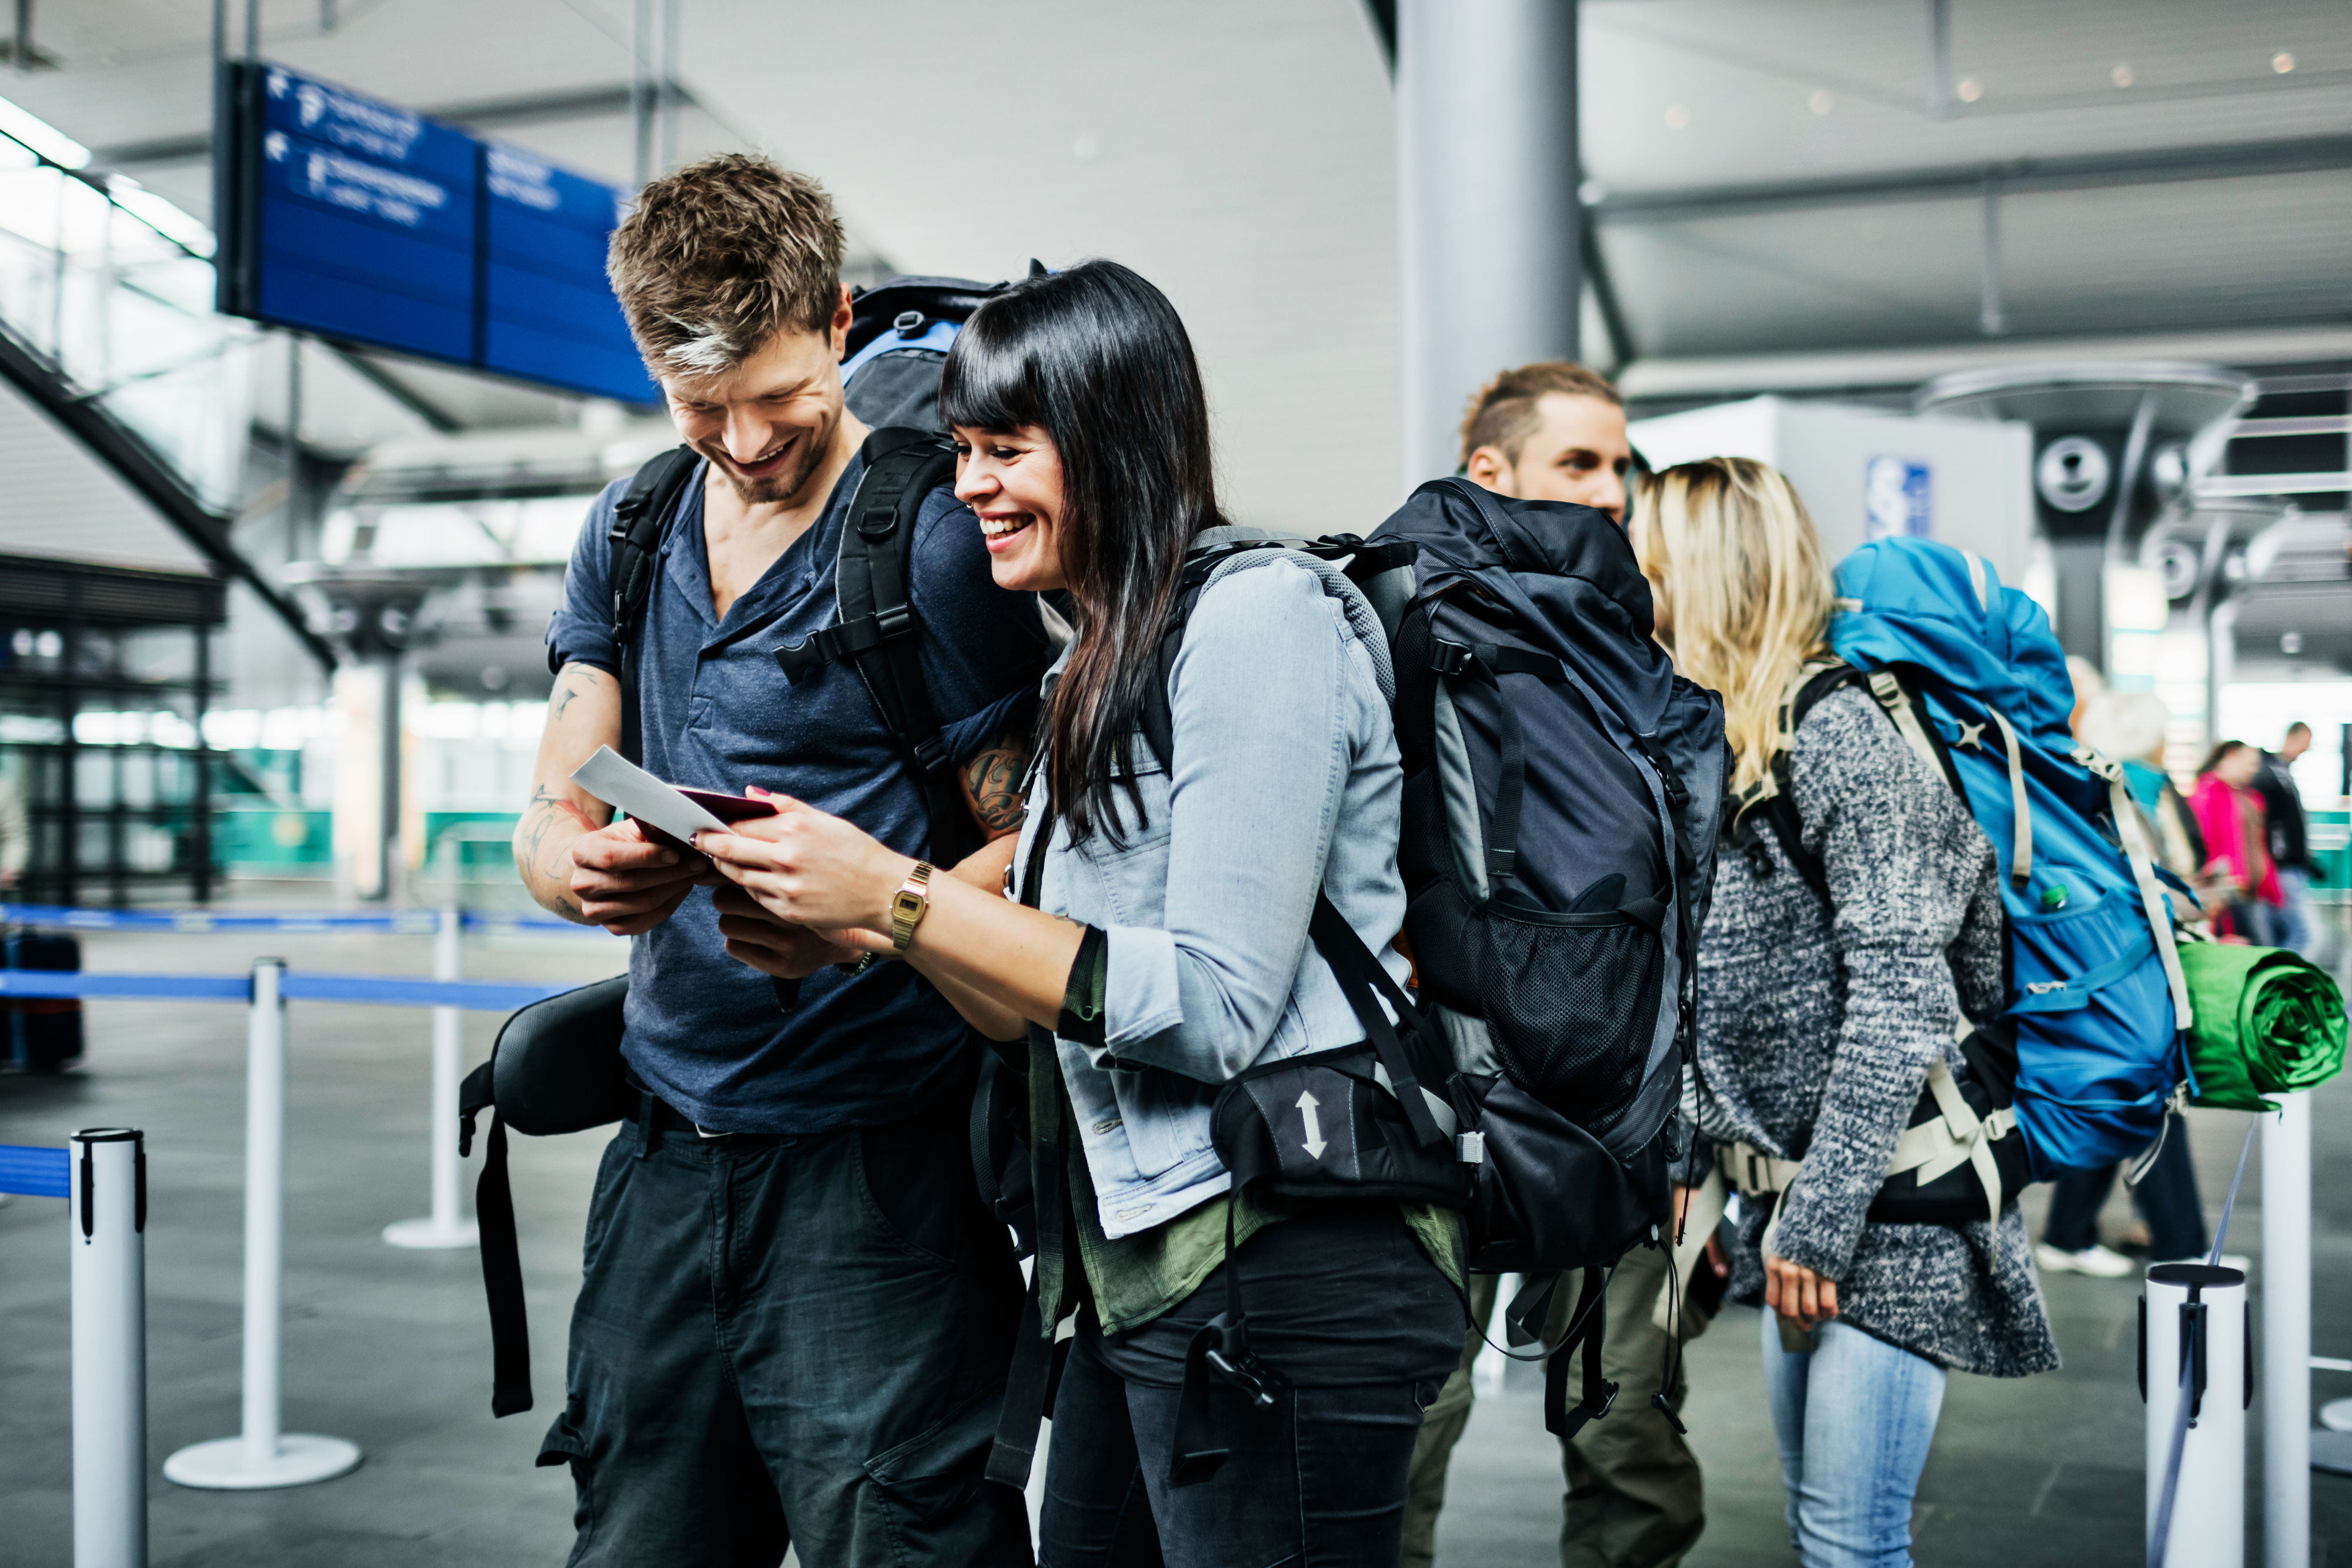 Two travelers with backpacks in an airport smiling at a smartphone